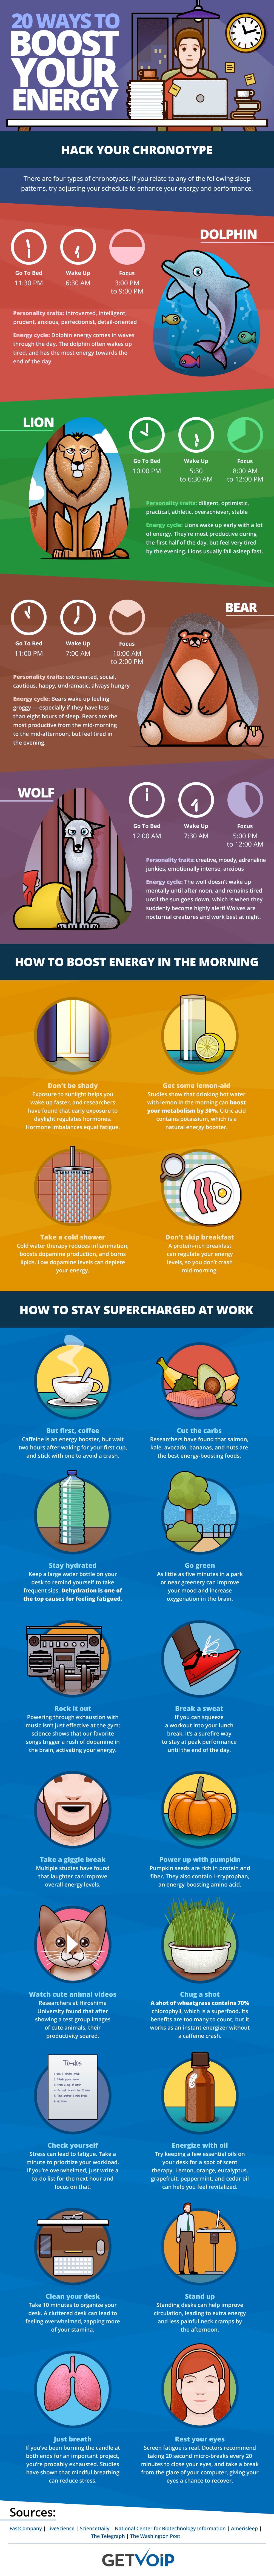 20 Ways to Boost Your Energy at Work Infographic